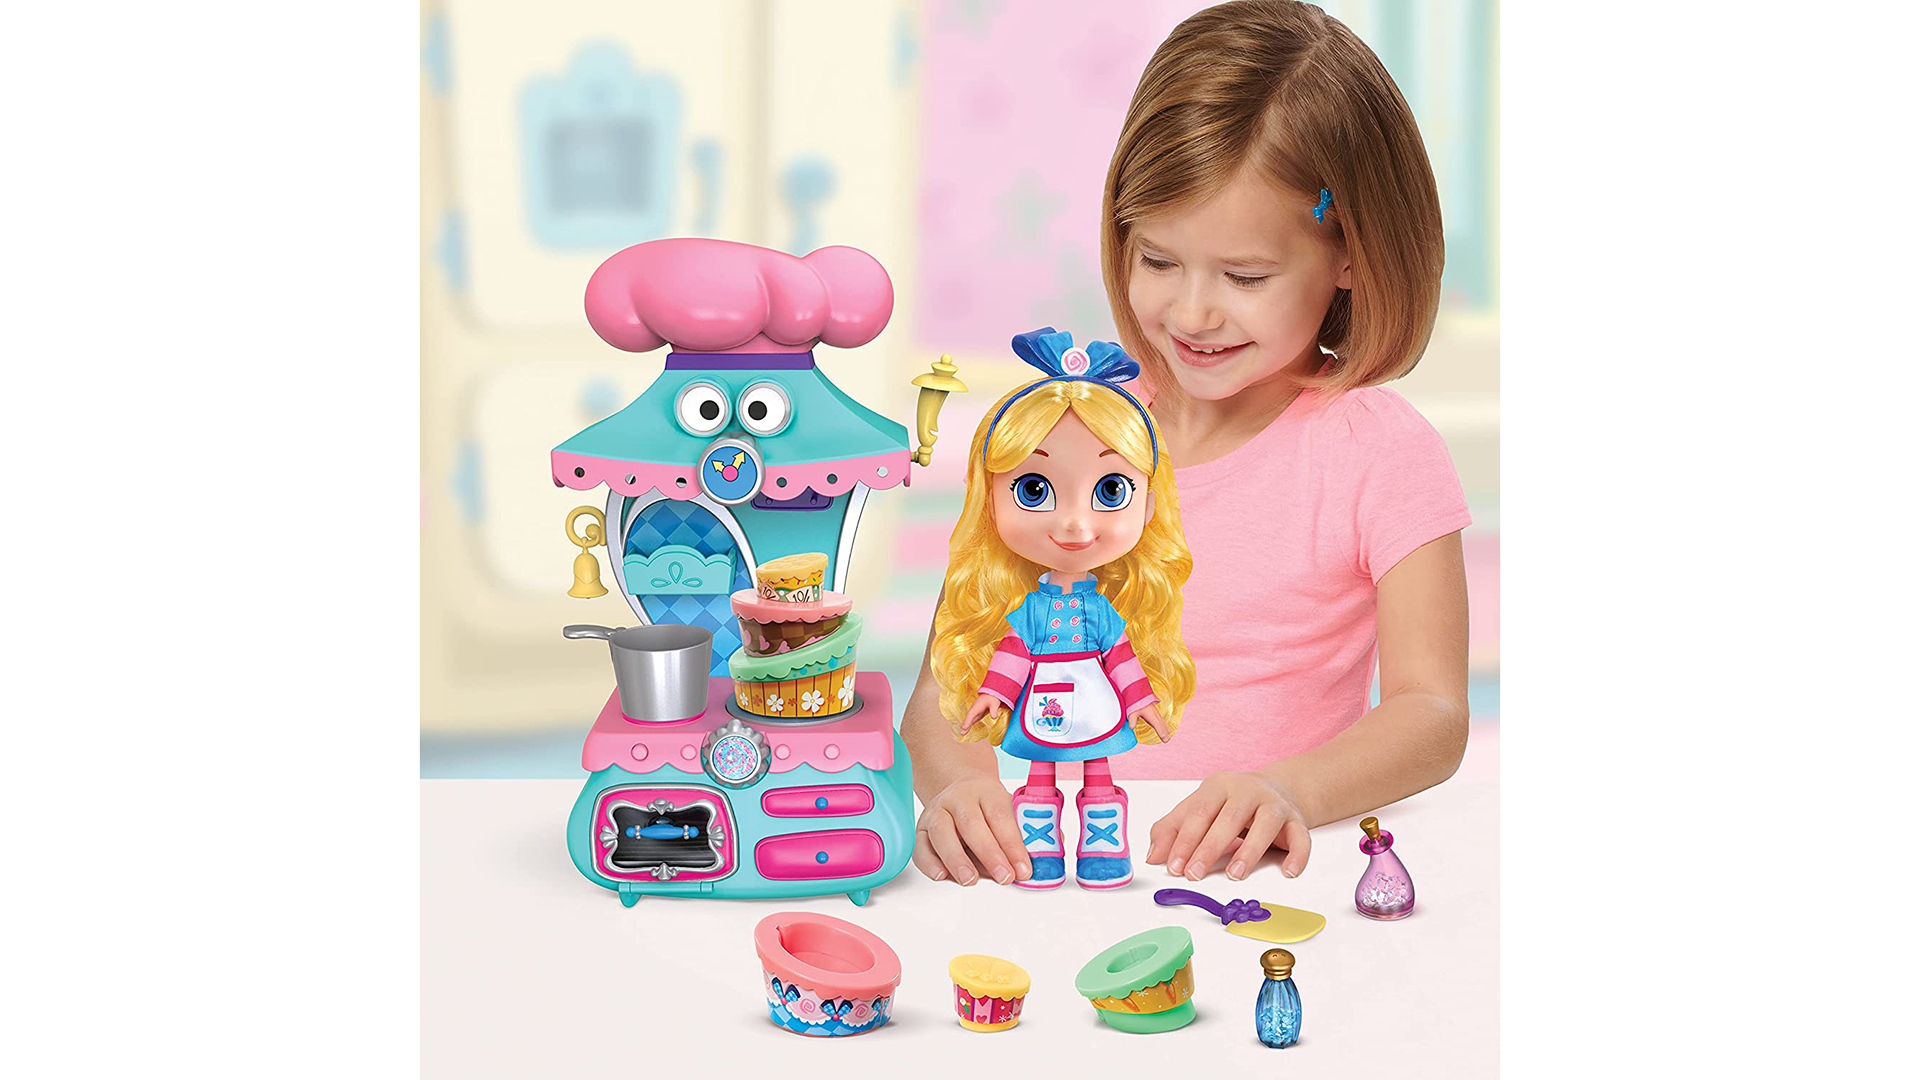 Alice's Wonderland Bakery Toys Will Hit Stores Later This Year